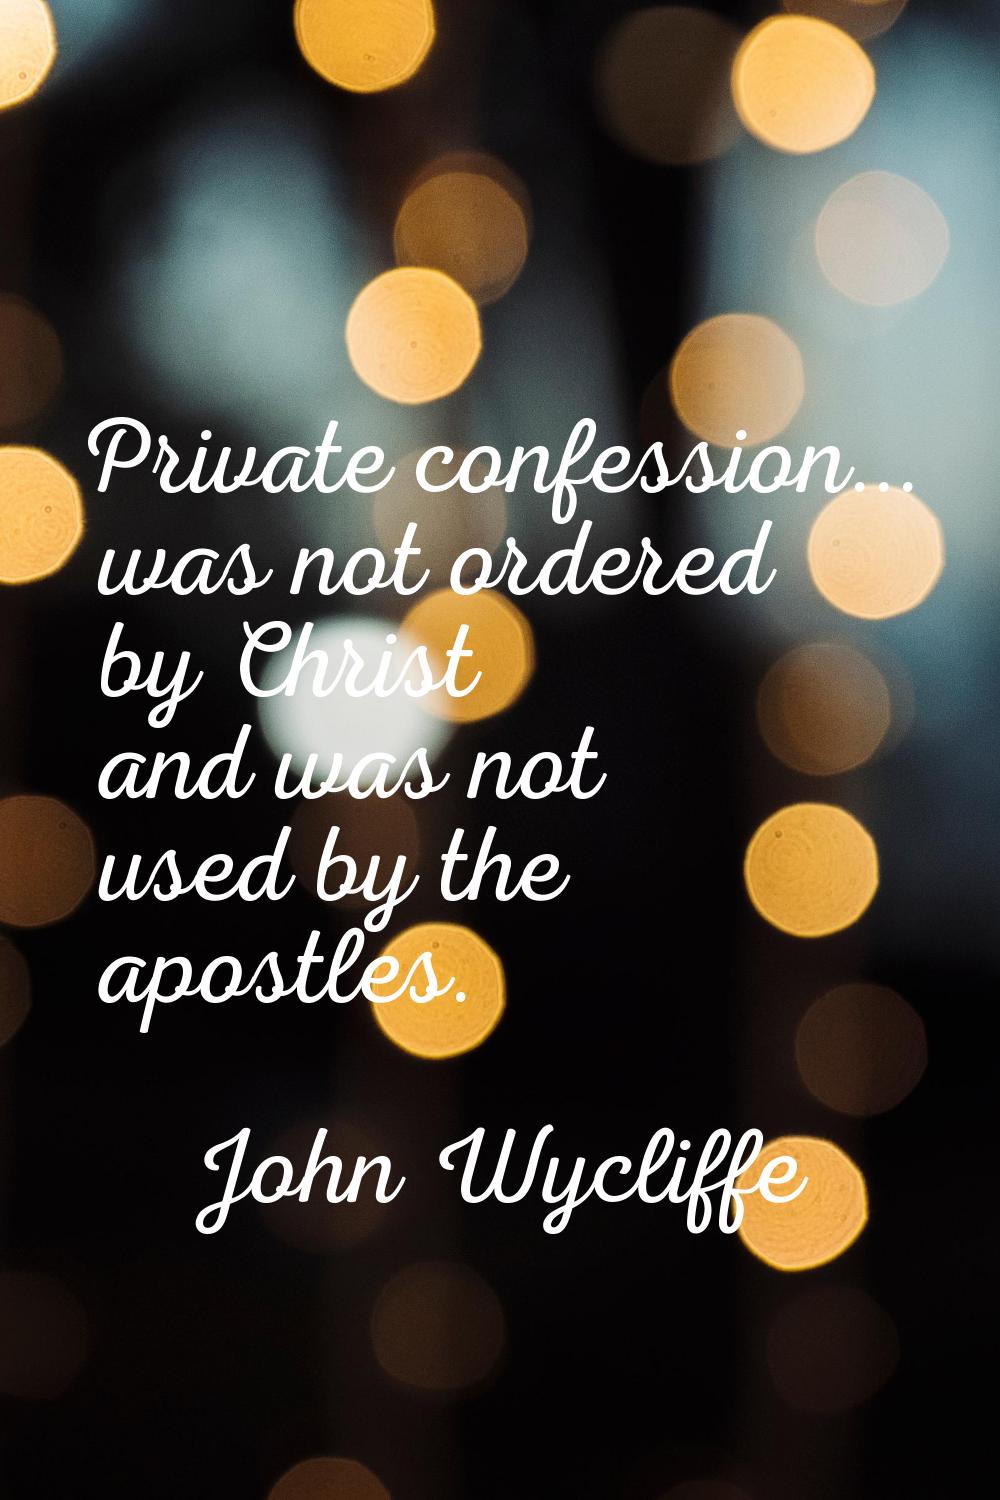 Private confession... was not ordered by Christ and was not used by the apostles.